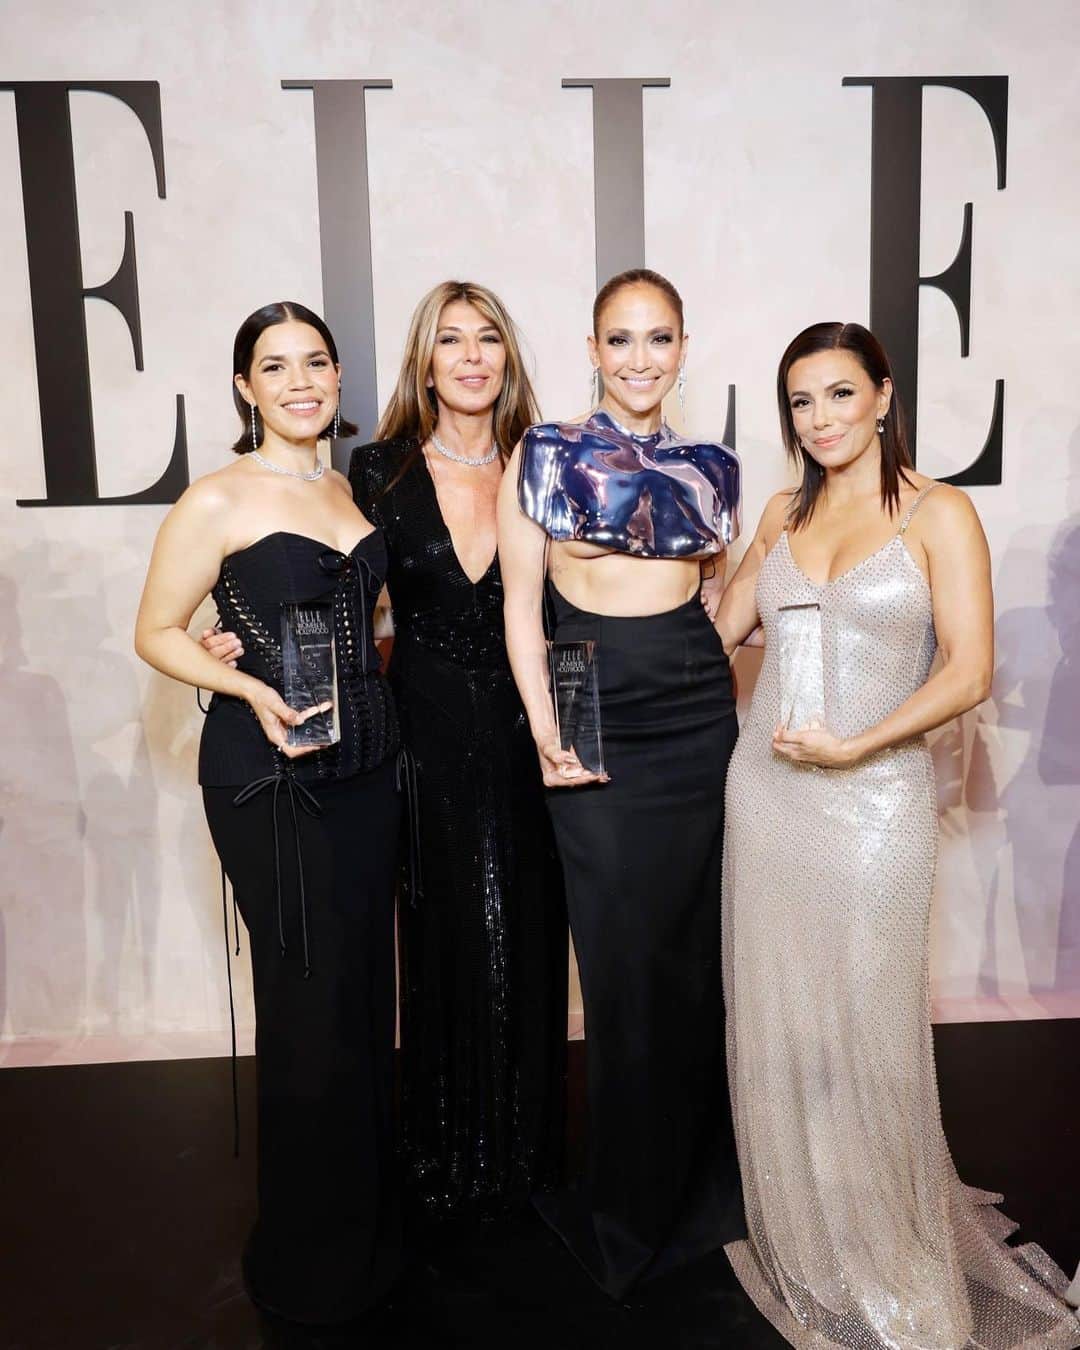 アメリカ・フェレーラのインスタグラム：「Santa Maria! Hot damn! Holy Shmoly!! I can not find the words to convey the amazingness of last night at Elle Women in Hollywood. Being in a room full of women I love and admire was life-giving! Every single speech was personal, wise and profound. My soul sister Eva Longoria presented me with the most moving speech I have ever had given to me. She made me sob as only she can because she is the person in this industry who knows my experiences so intimately and really truly sees me. Thank you Eva for presenting to me even as you were being honored yourself by the equally amazing @kerrywashington ! Slide 7 is the look on my face all night- just deeply in awe and in gratitude to witness the light of all the women being honored - @lilygladstone @jlo @tarajiphenson @tasiasword @daniebb3 #JodieFoster #GretaLee @evalongoria   Thank you @elleusa & @ninagarcia 💜  And I was so honored to have some of my favorite Women in Hollywood by my side, my team and mentors who fight for me and lift me up every day- @trustalexandra @kawachouttt @haubegger @carriebyalick @ntlmoran @taranitup49 @secretagentm   This past week has been overwhelmingly full of love and recognition for my work as an actress and advocate. I don’t take a single moment of it for granted. Thanks for being on the journey with me. 🥹  And thank you as ever to the glam team that helps me look and feel as powerful on the outside as I do on the inside 😘 @karlawelchstylist  @carolagmakeup  @hairbyaviva  @jamiespradley  @gracewrightsell」